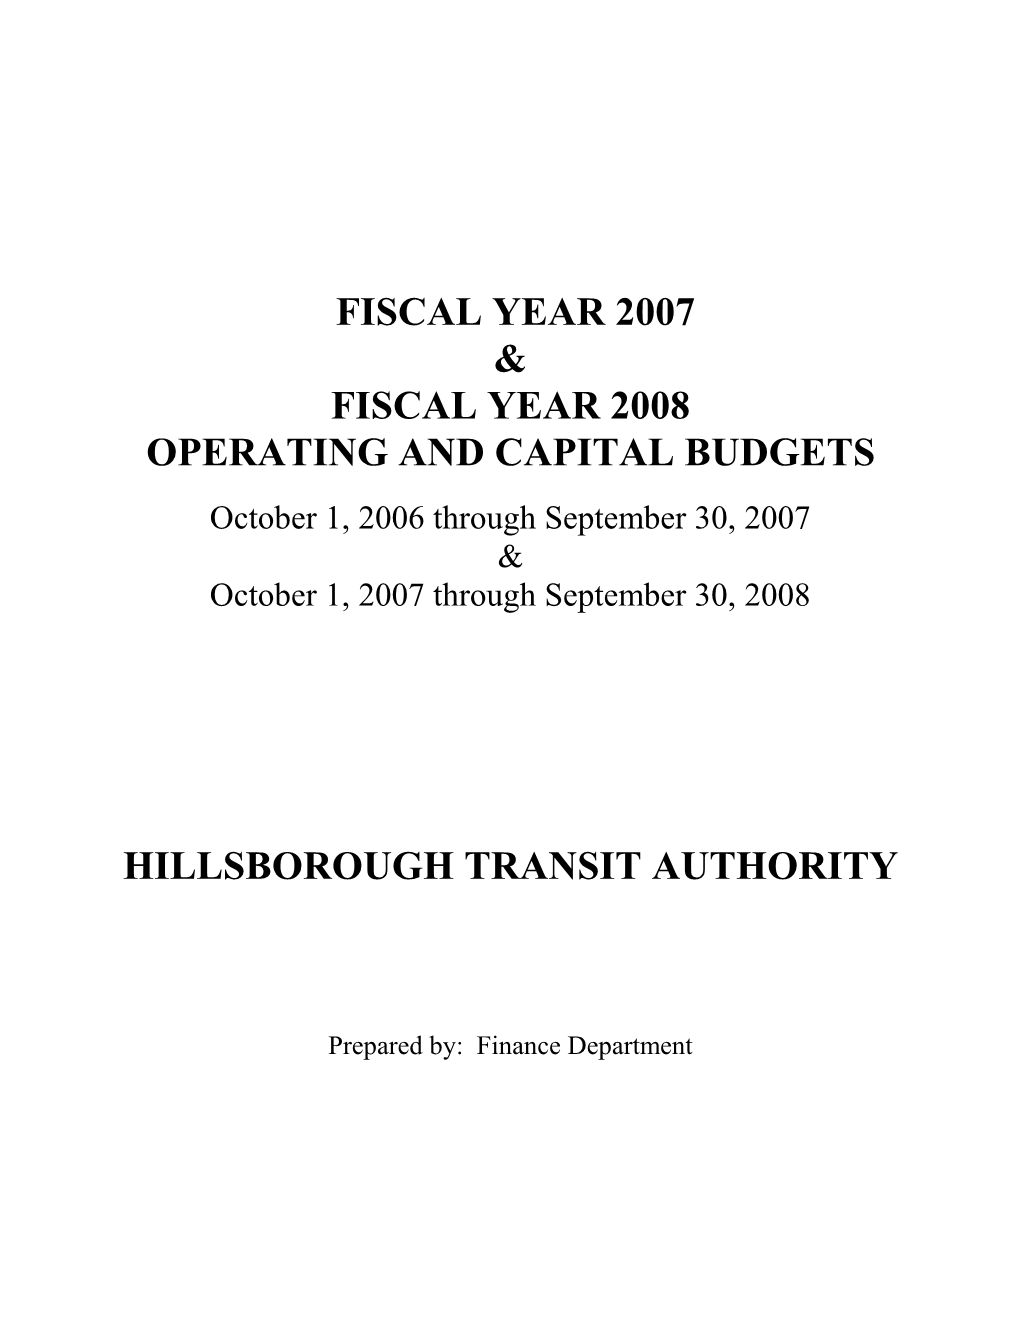 Fiscal Year 2007 & Fiscal Year 2008 Operating and Capital